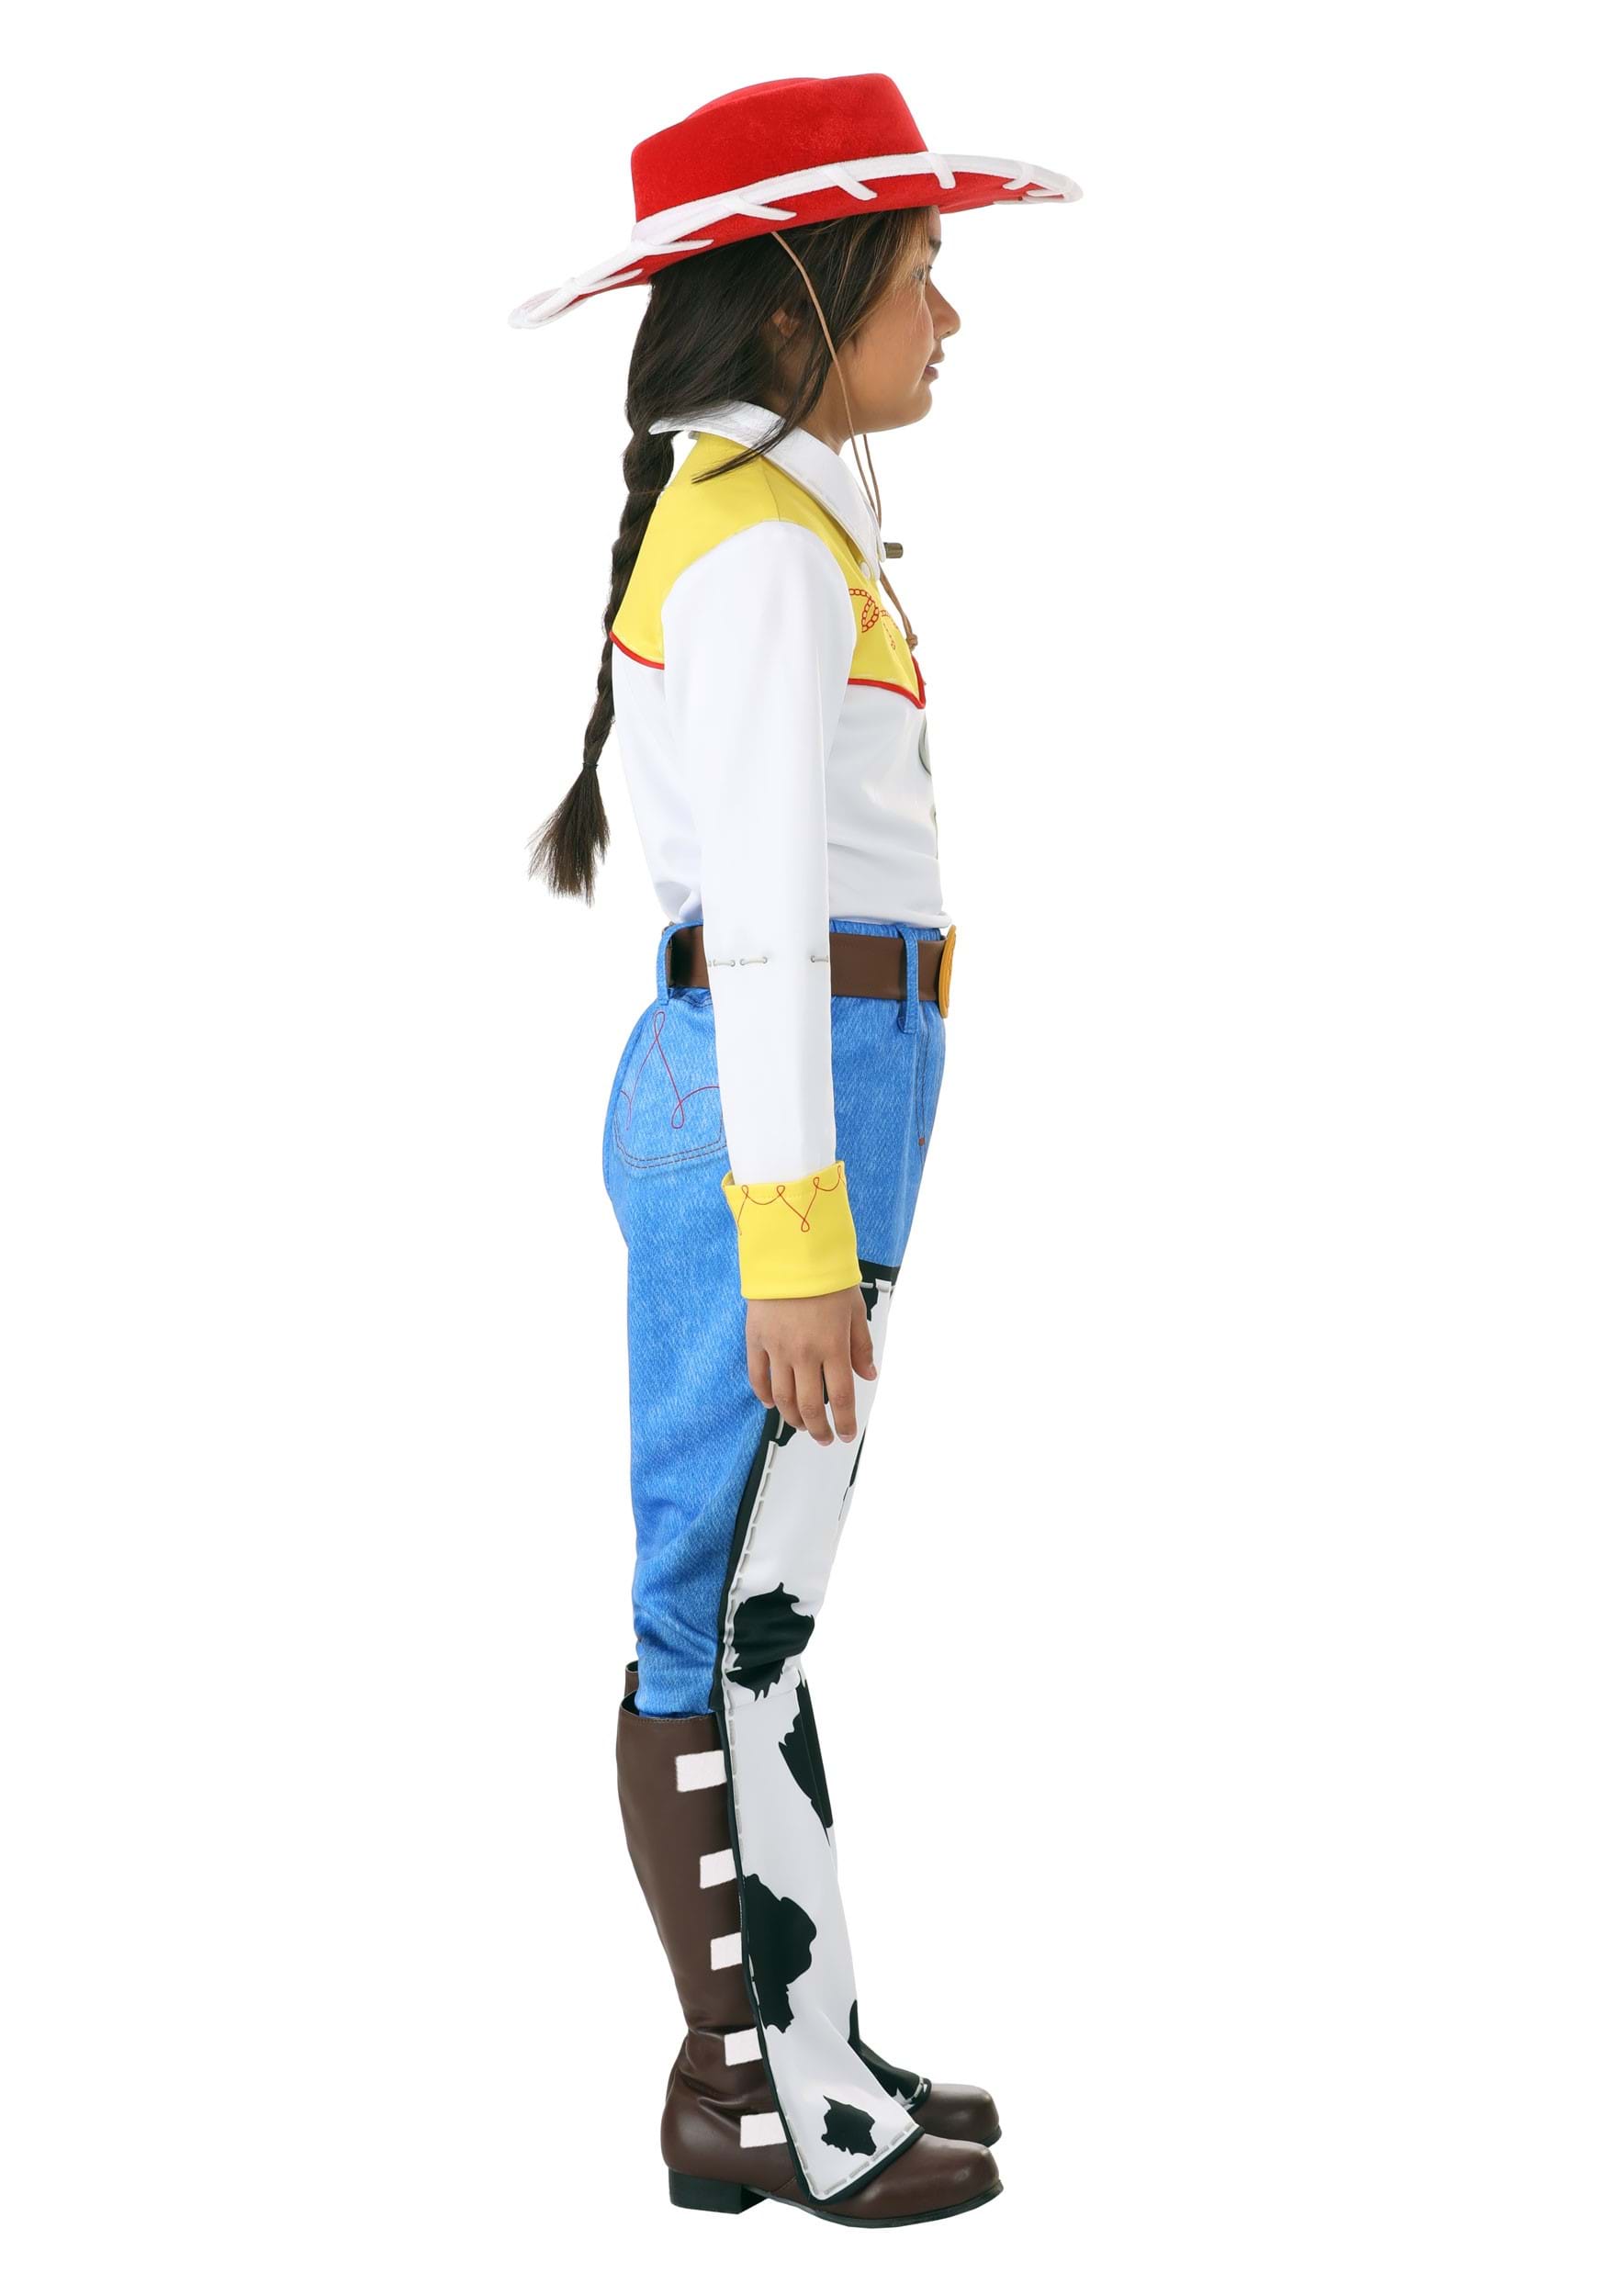 Deluxe Disney Toy Story Jessie Costume For Girls